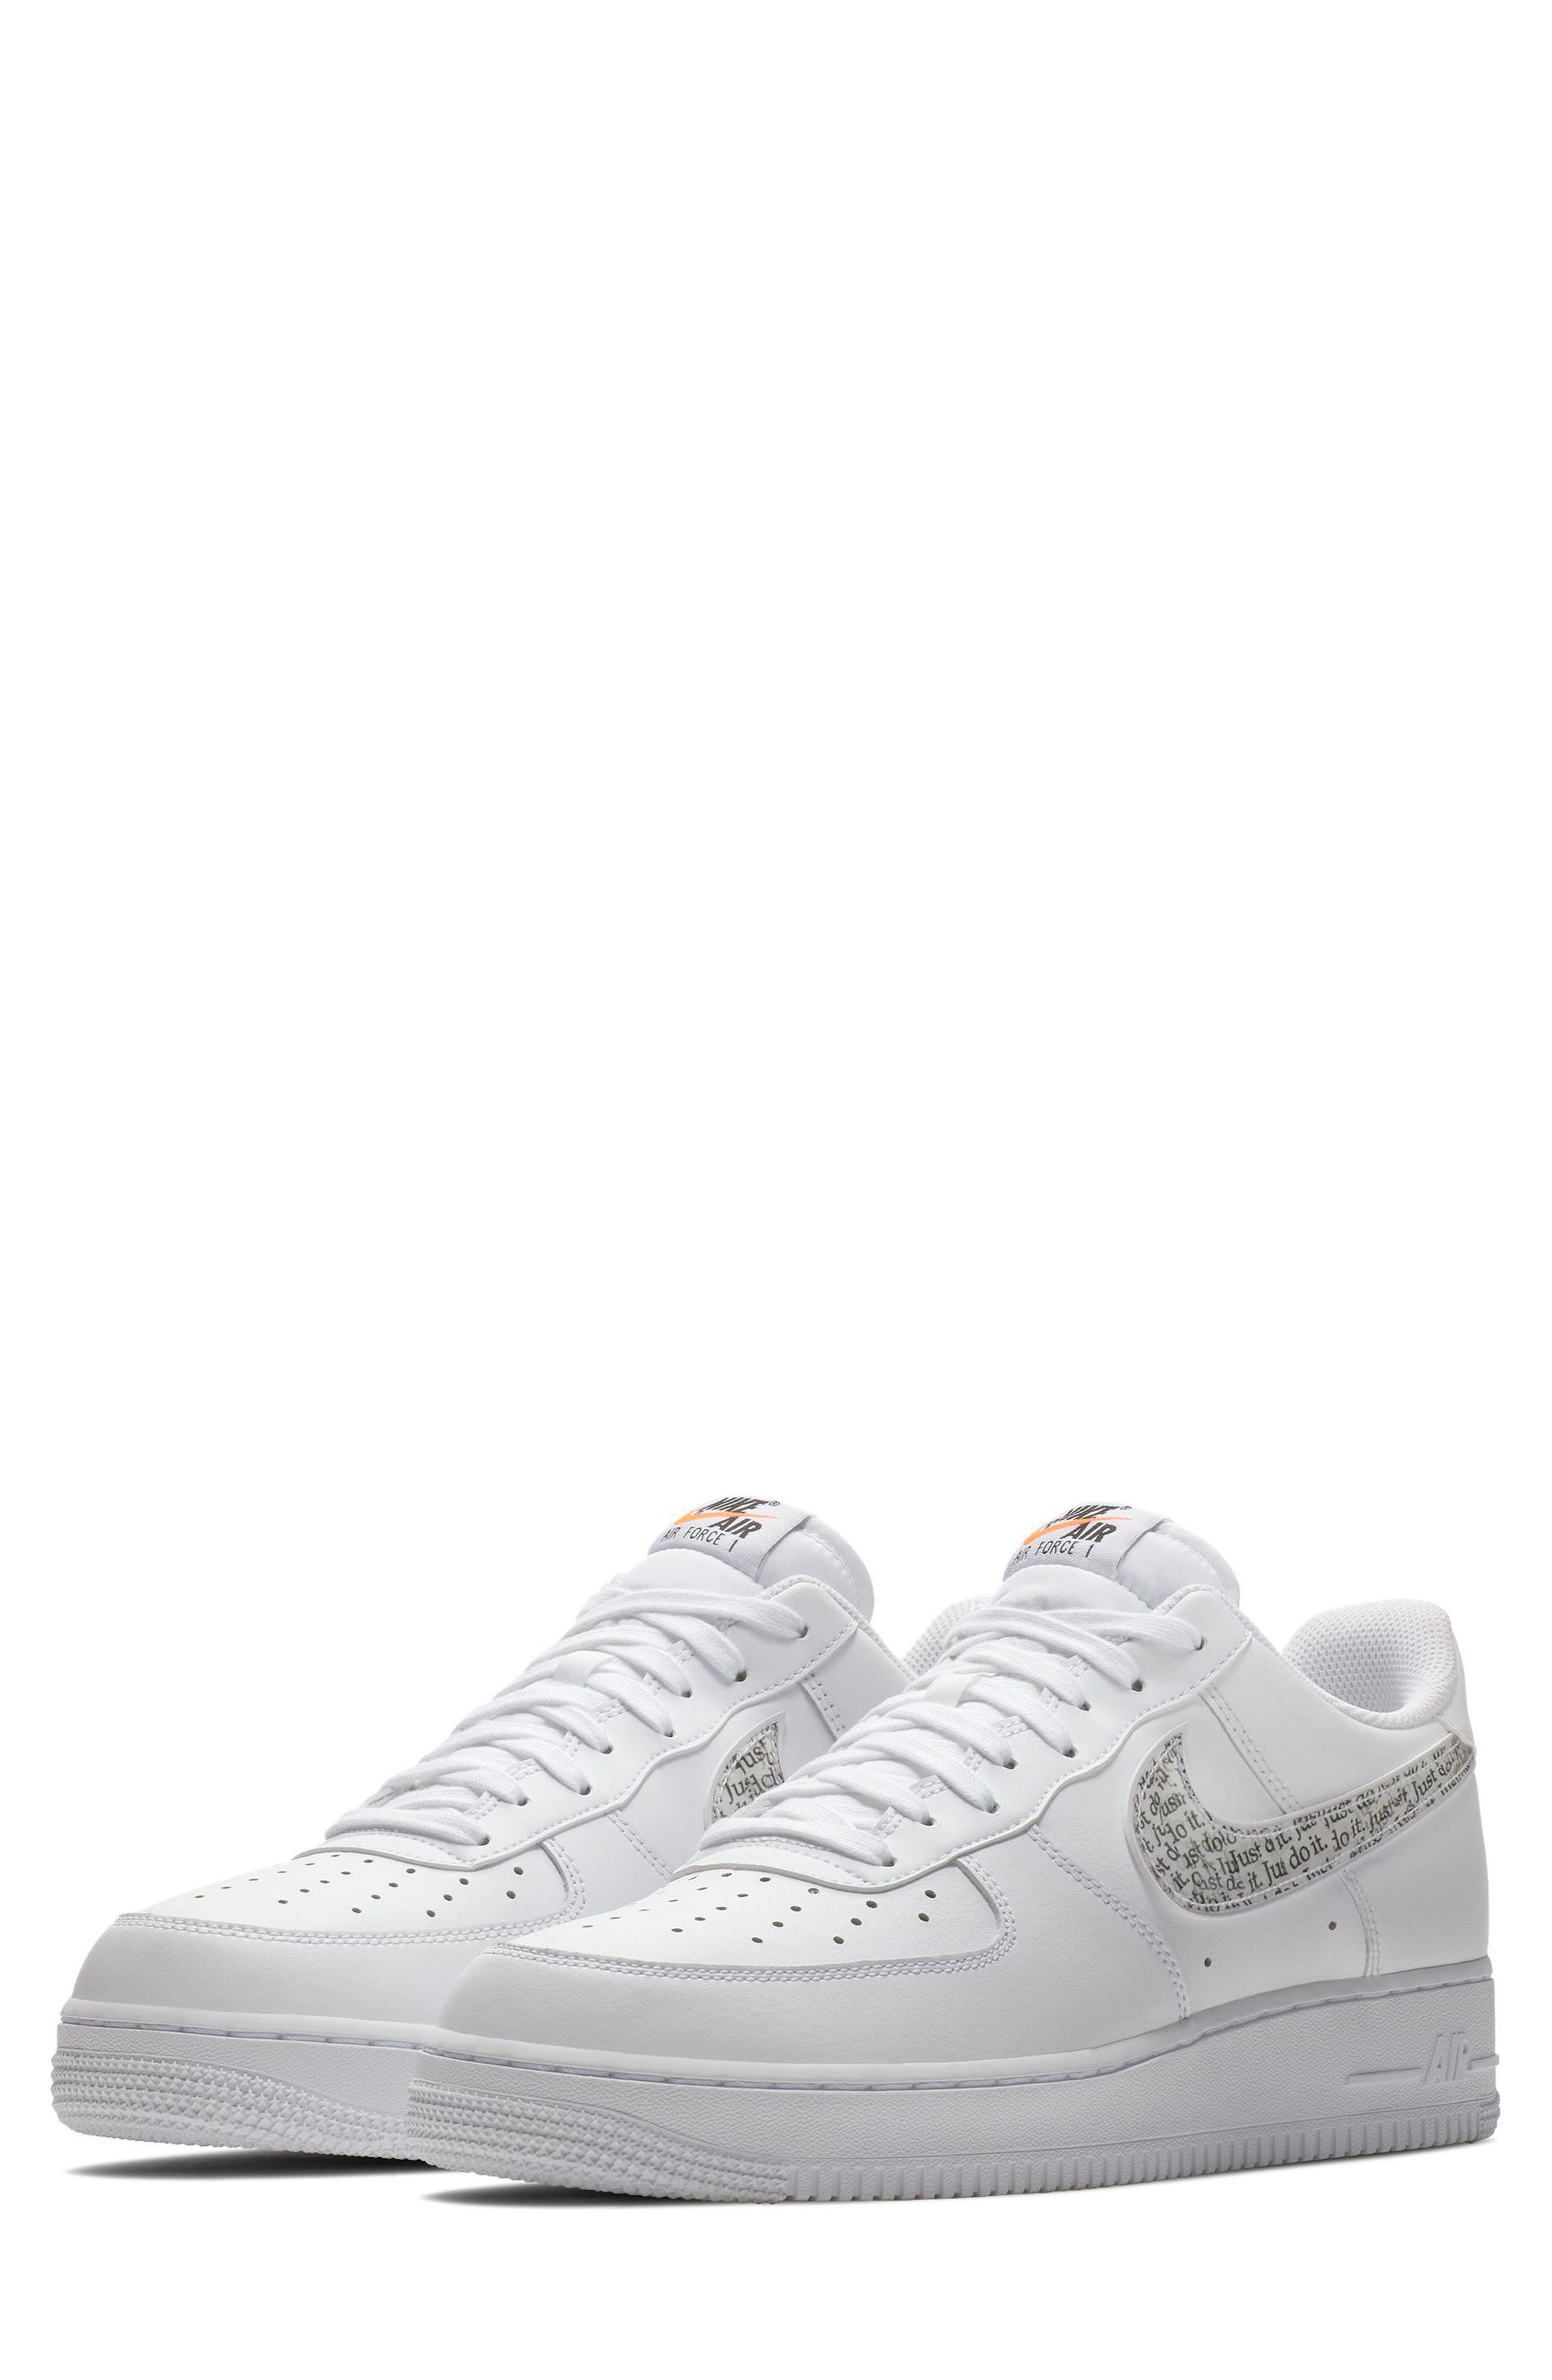 Nike Air Force 1 '07 LV8 Just Do It 